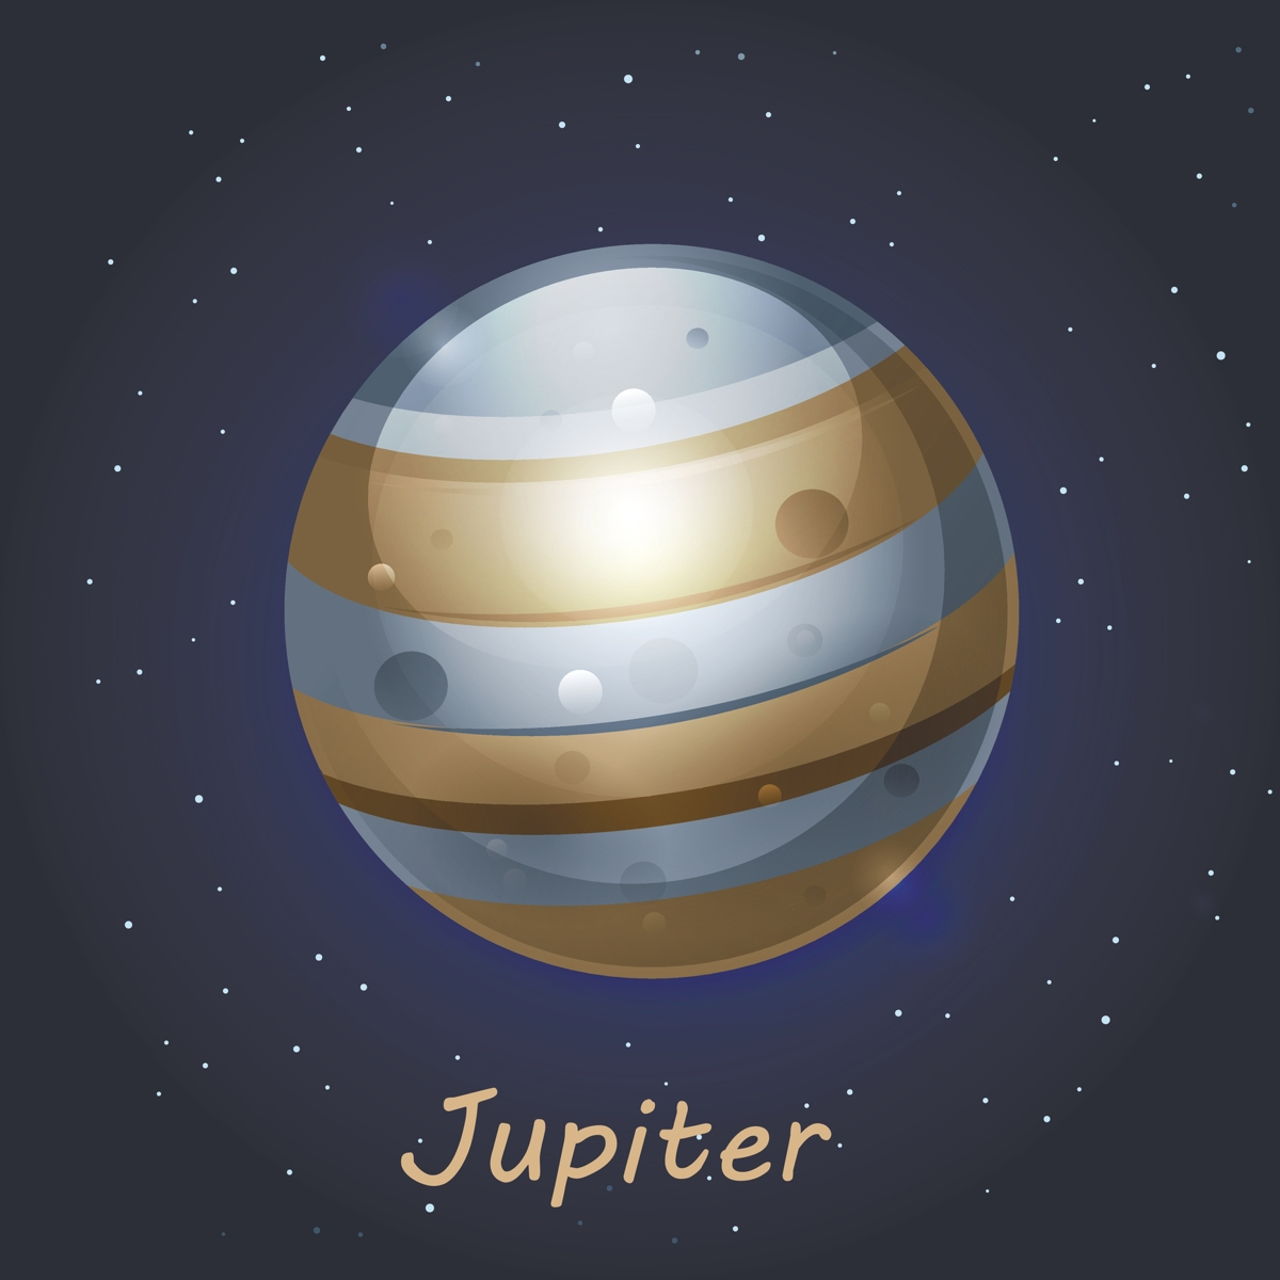 What Is Jupiter Made Of Gas Or Rock